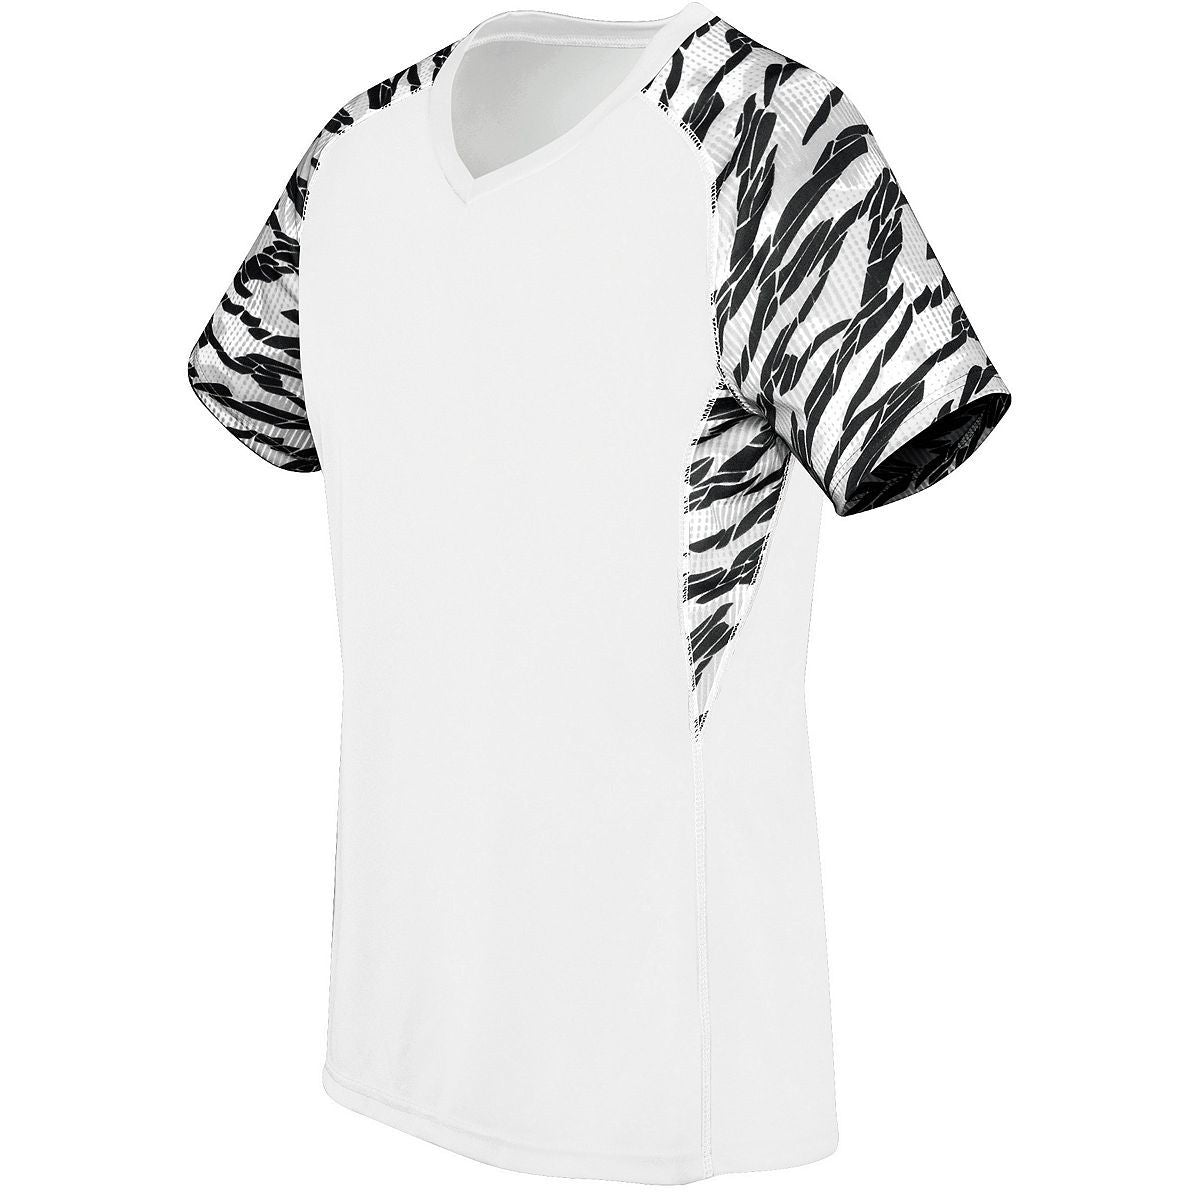 High 5 Ladies Printed Evolution Short Sleeve in White/Fragment Print/White  -Part of the Ladies, High5-Products, Shirts product lines at KanaleyCreations.com